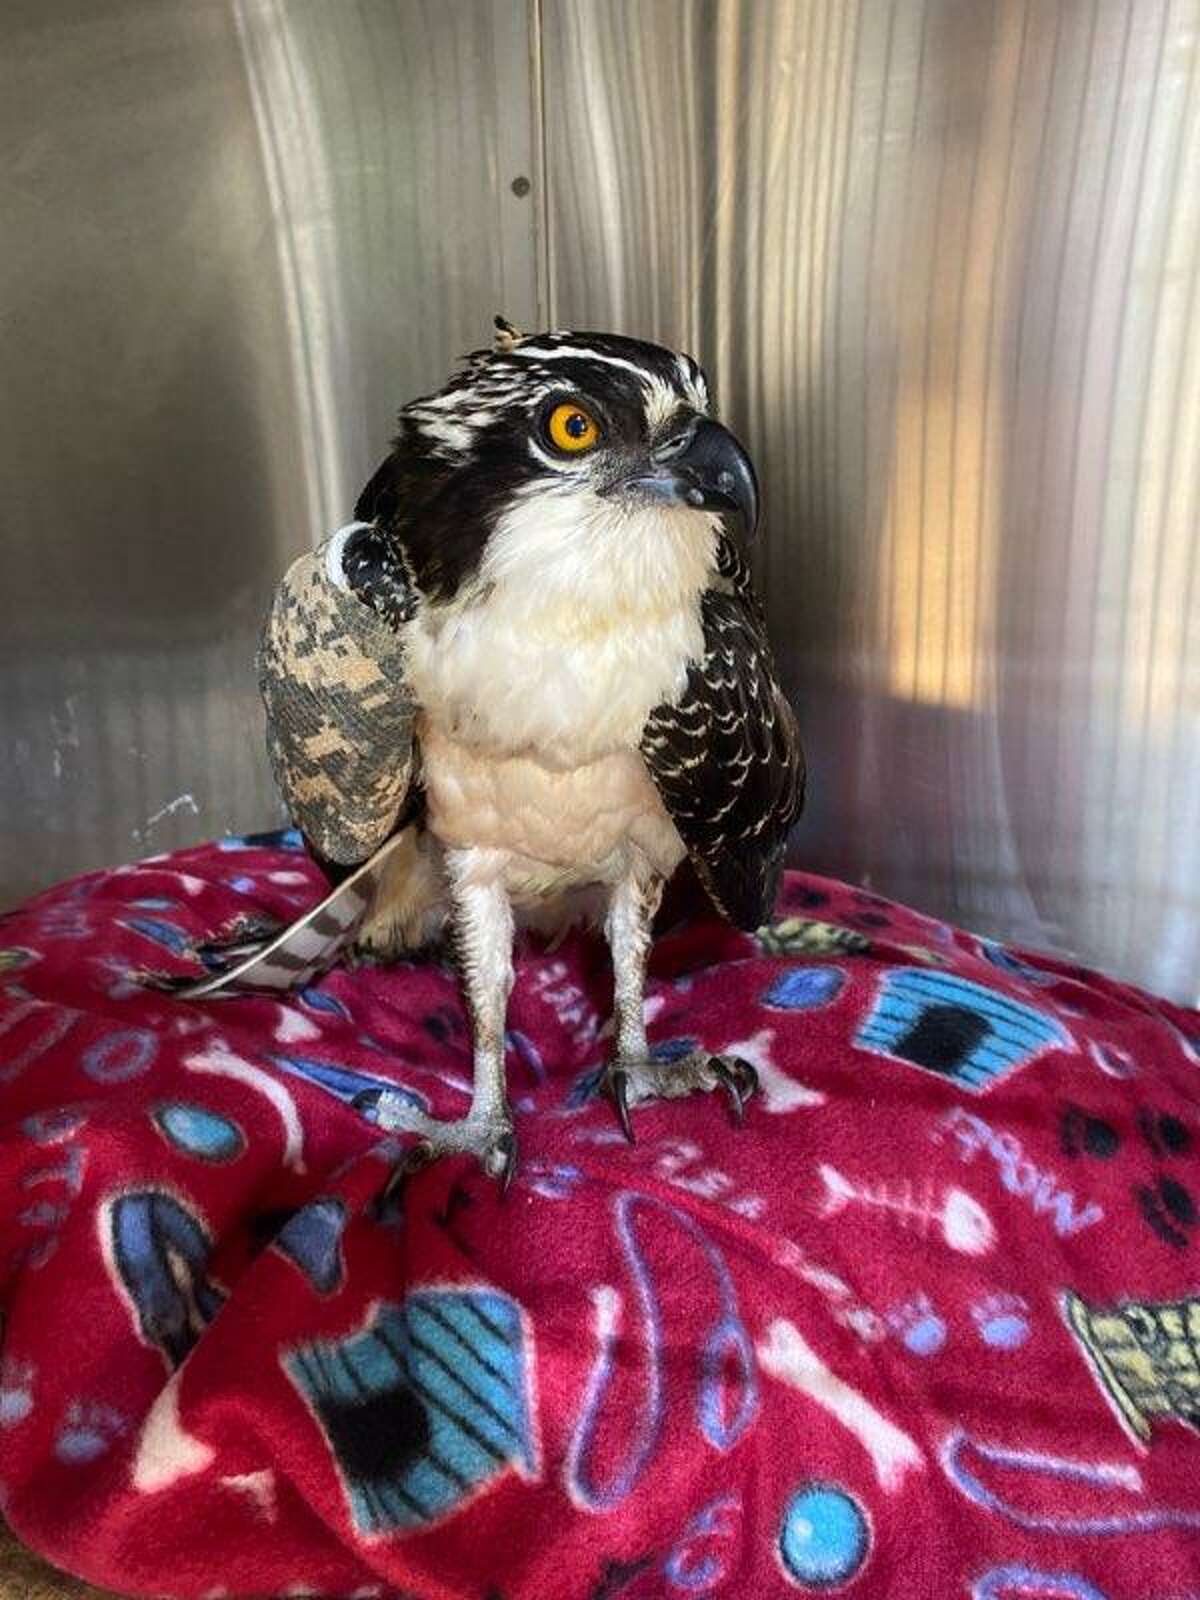 The rescued osprey